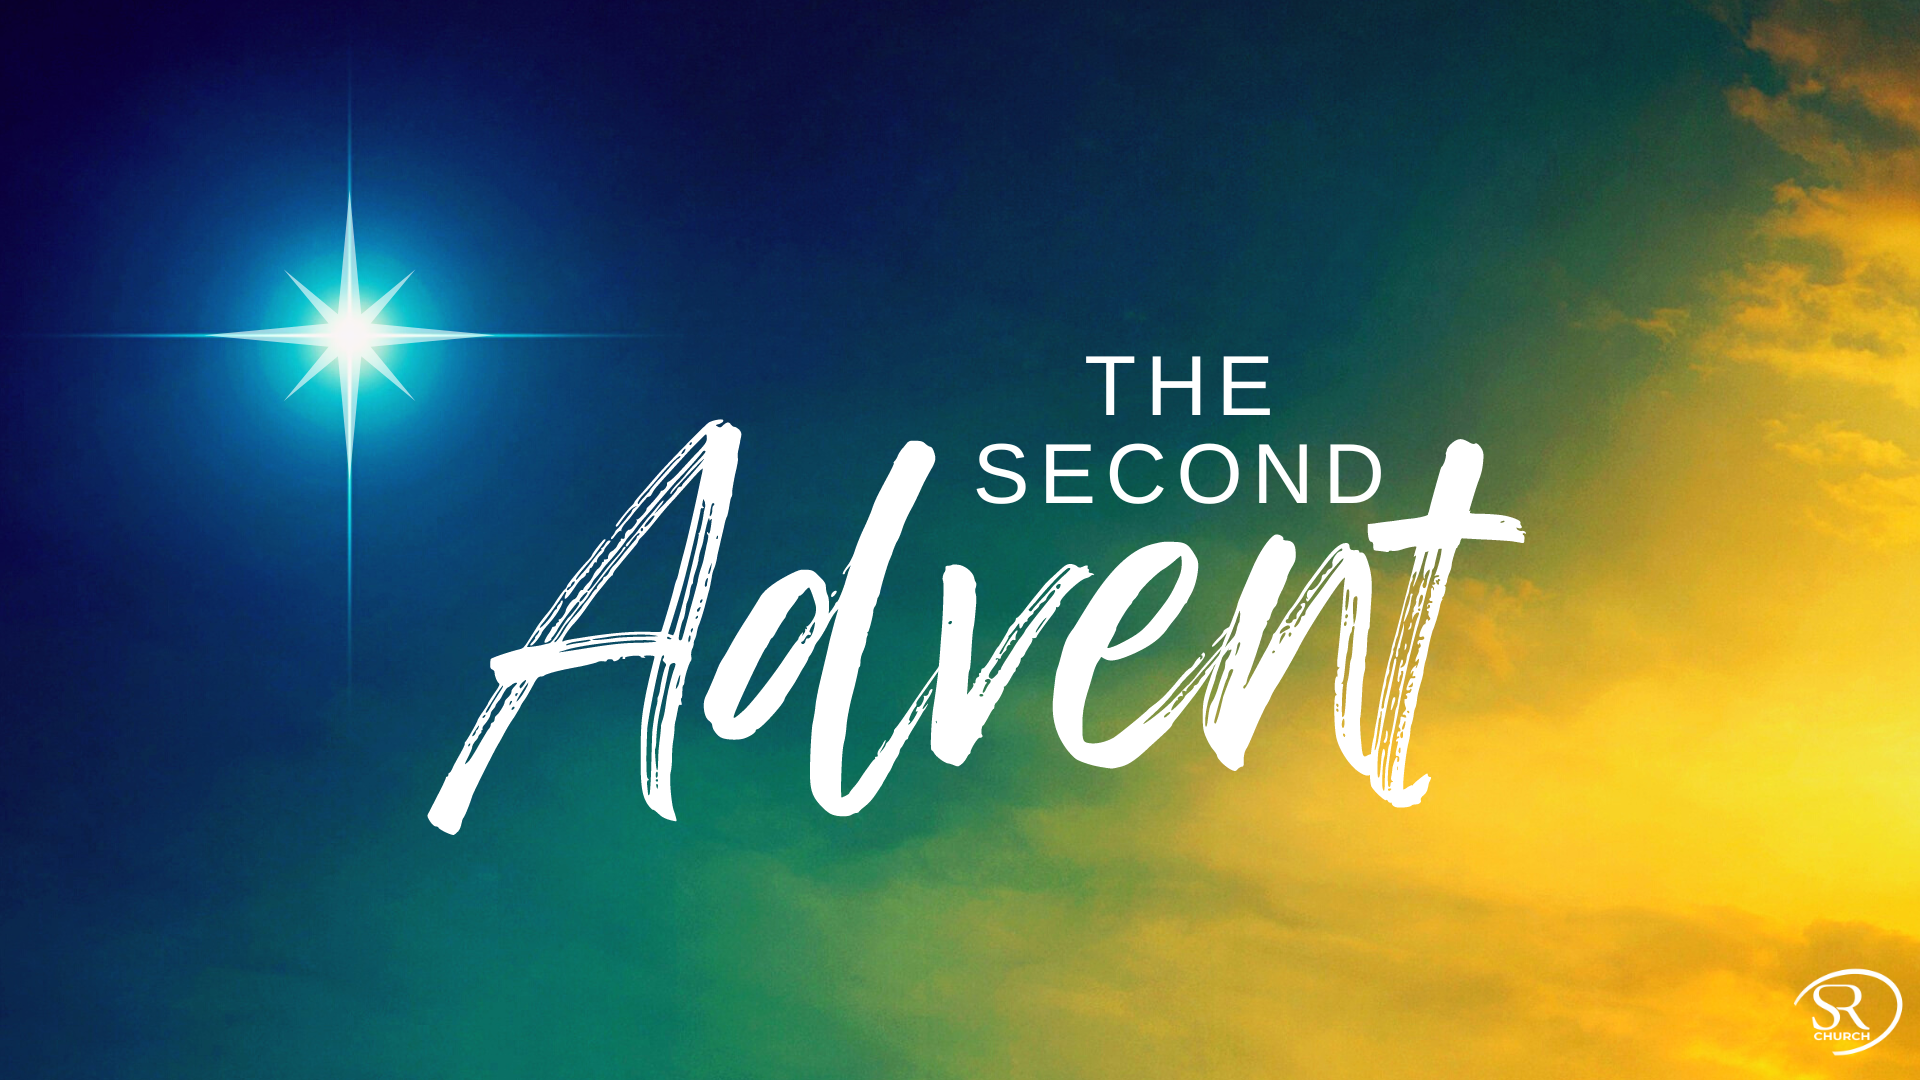 The Second Advent